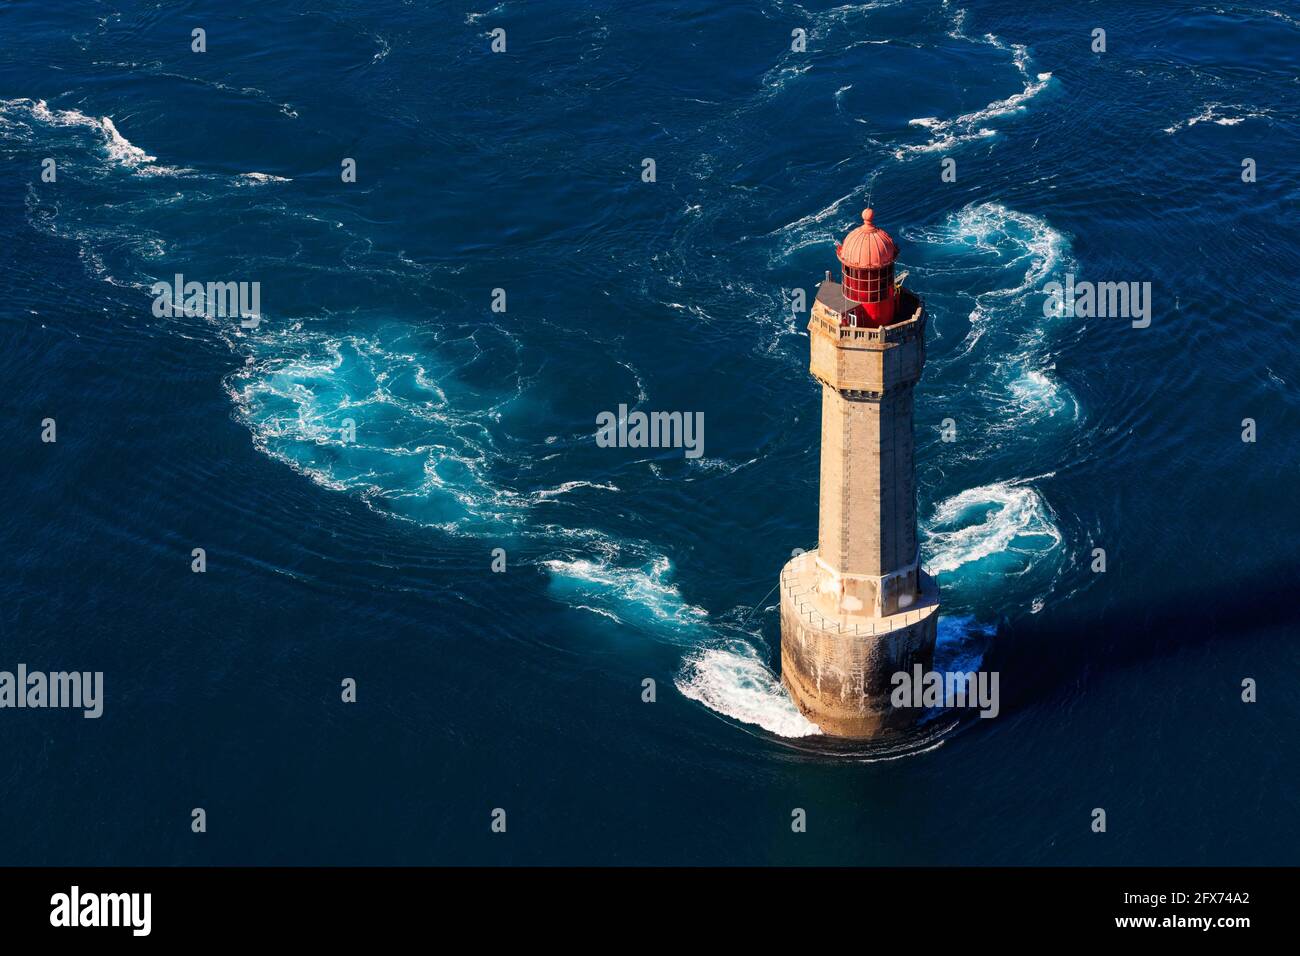 FRANCE. BRITTANY. FINISTERE (29) PHARE DE LA JUMENT LIGHTHOUSE BETWEEN MOLENE AND OUESSANT ISLANDS (AERIAL VIEW) Stock Photo